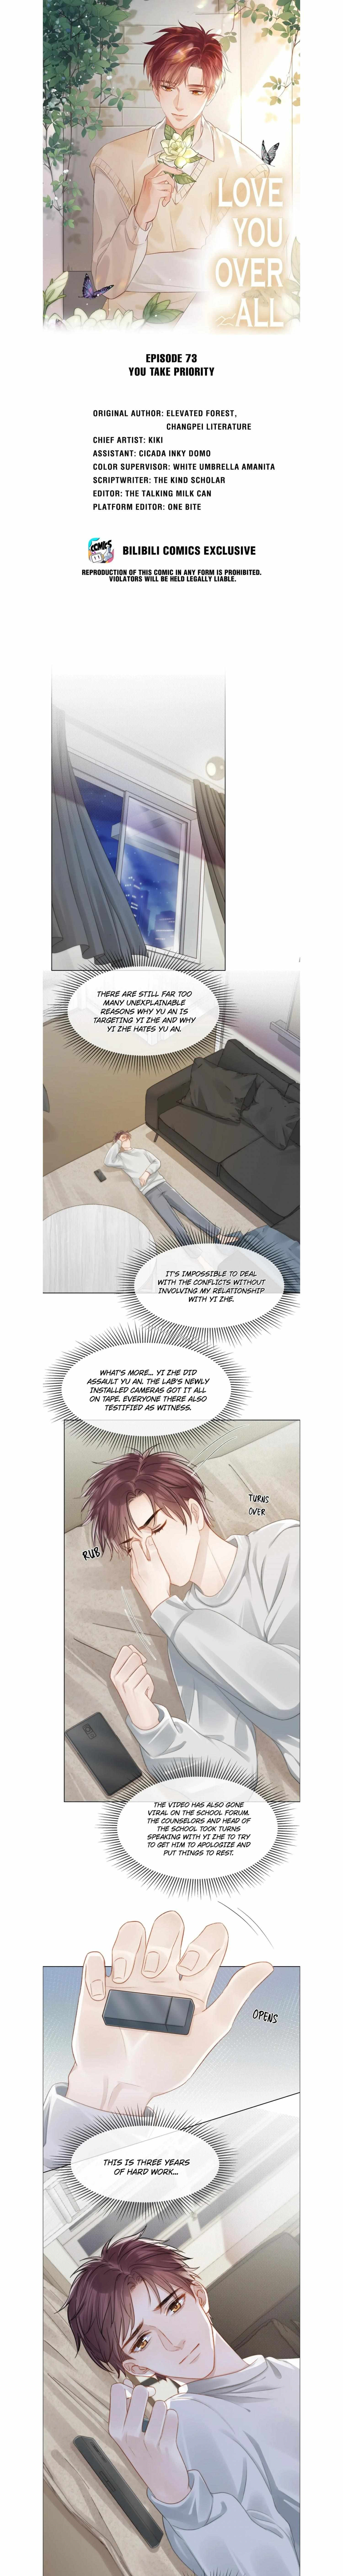 Love You Over All - Page 2